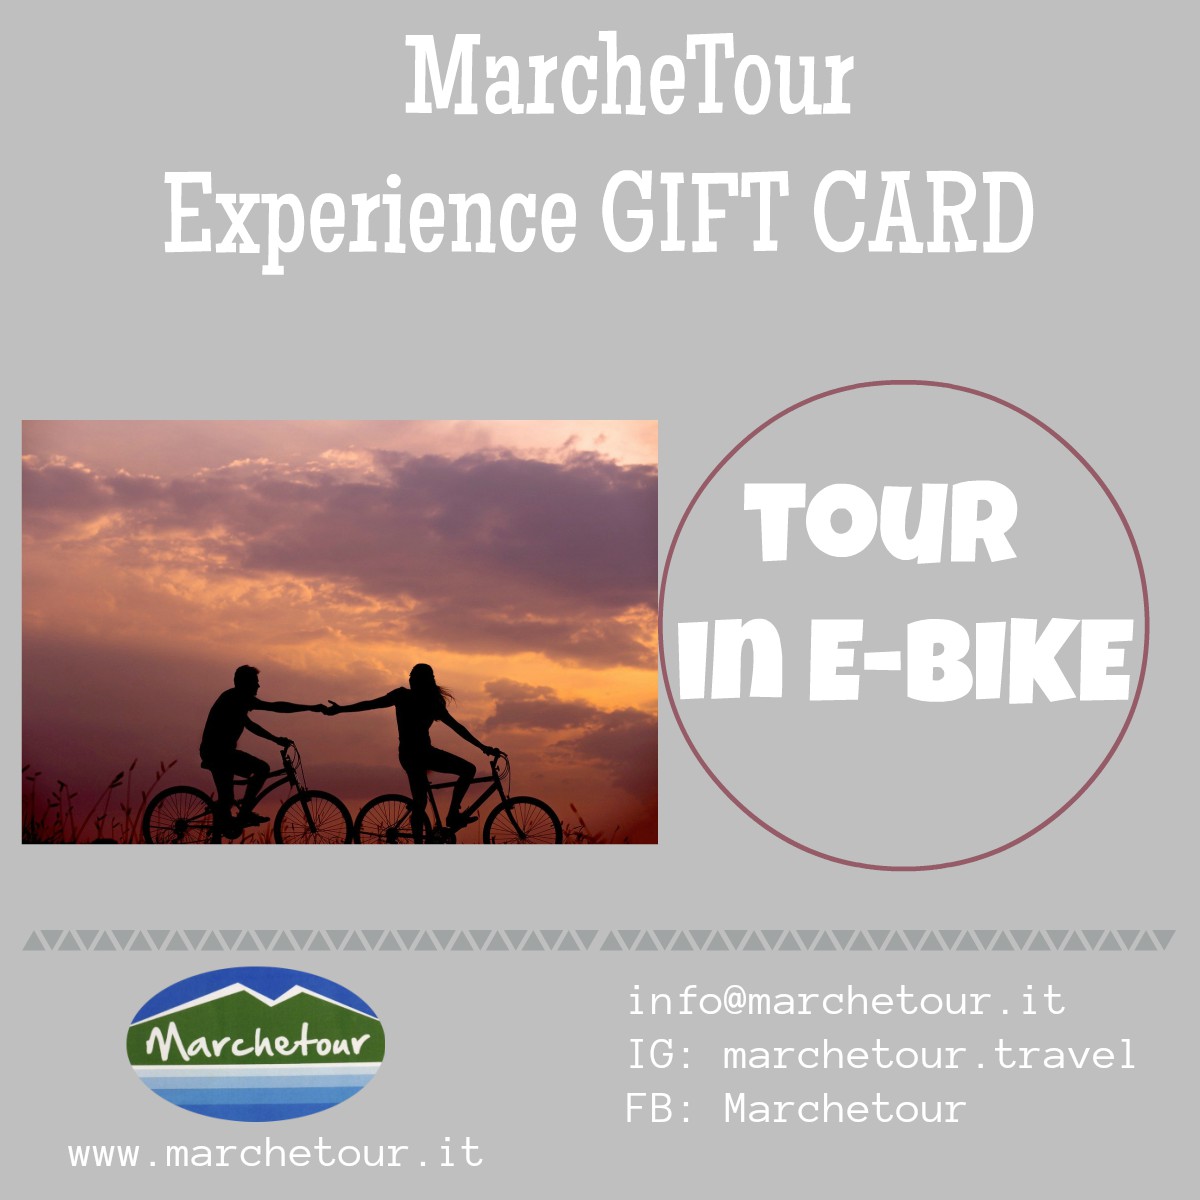 Experience Gift Card: Tour in E-bike